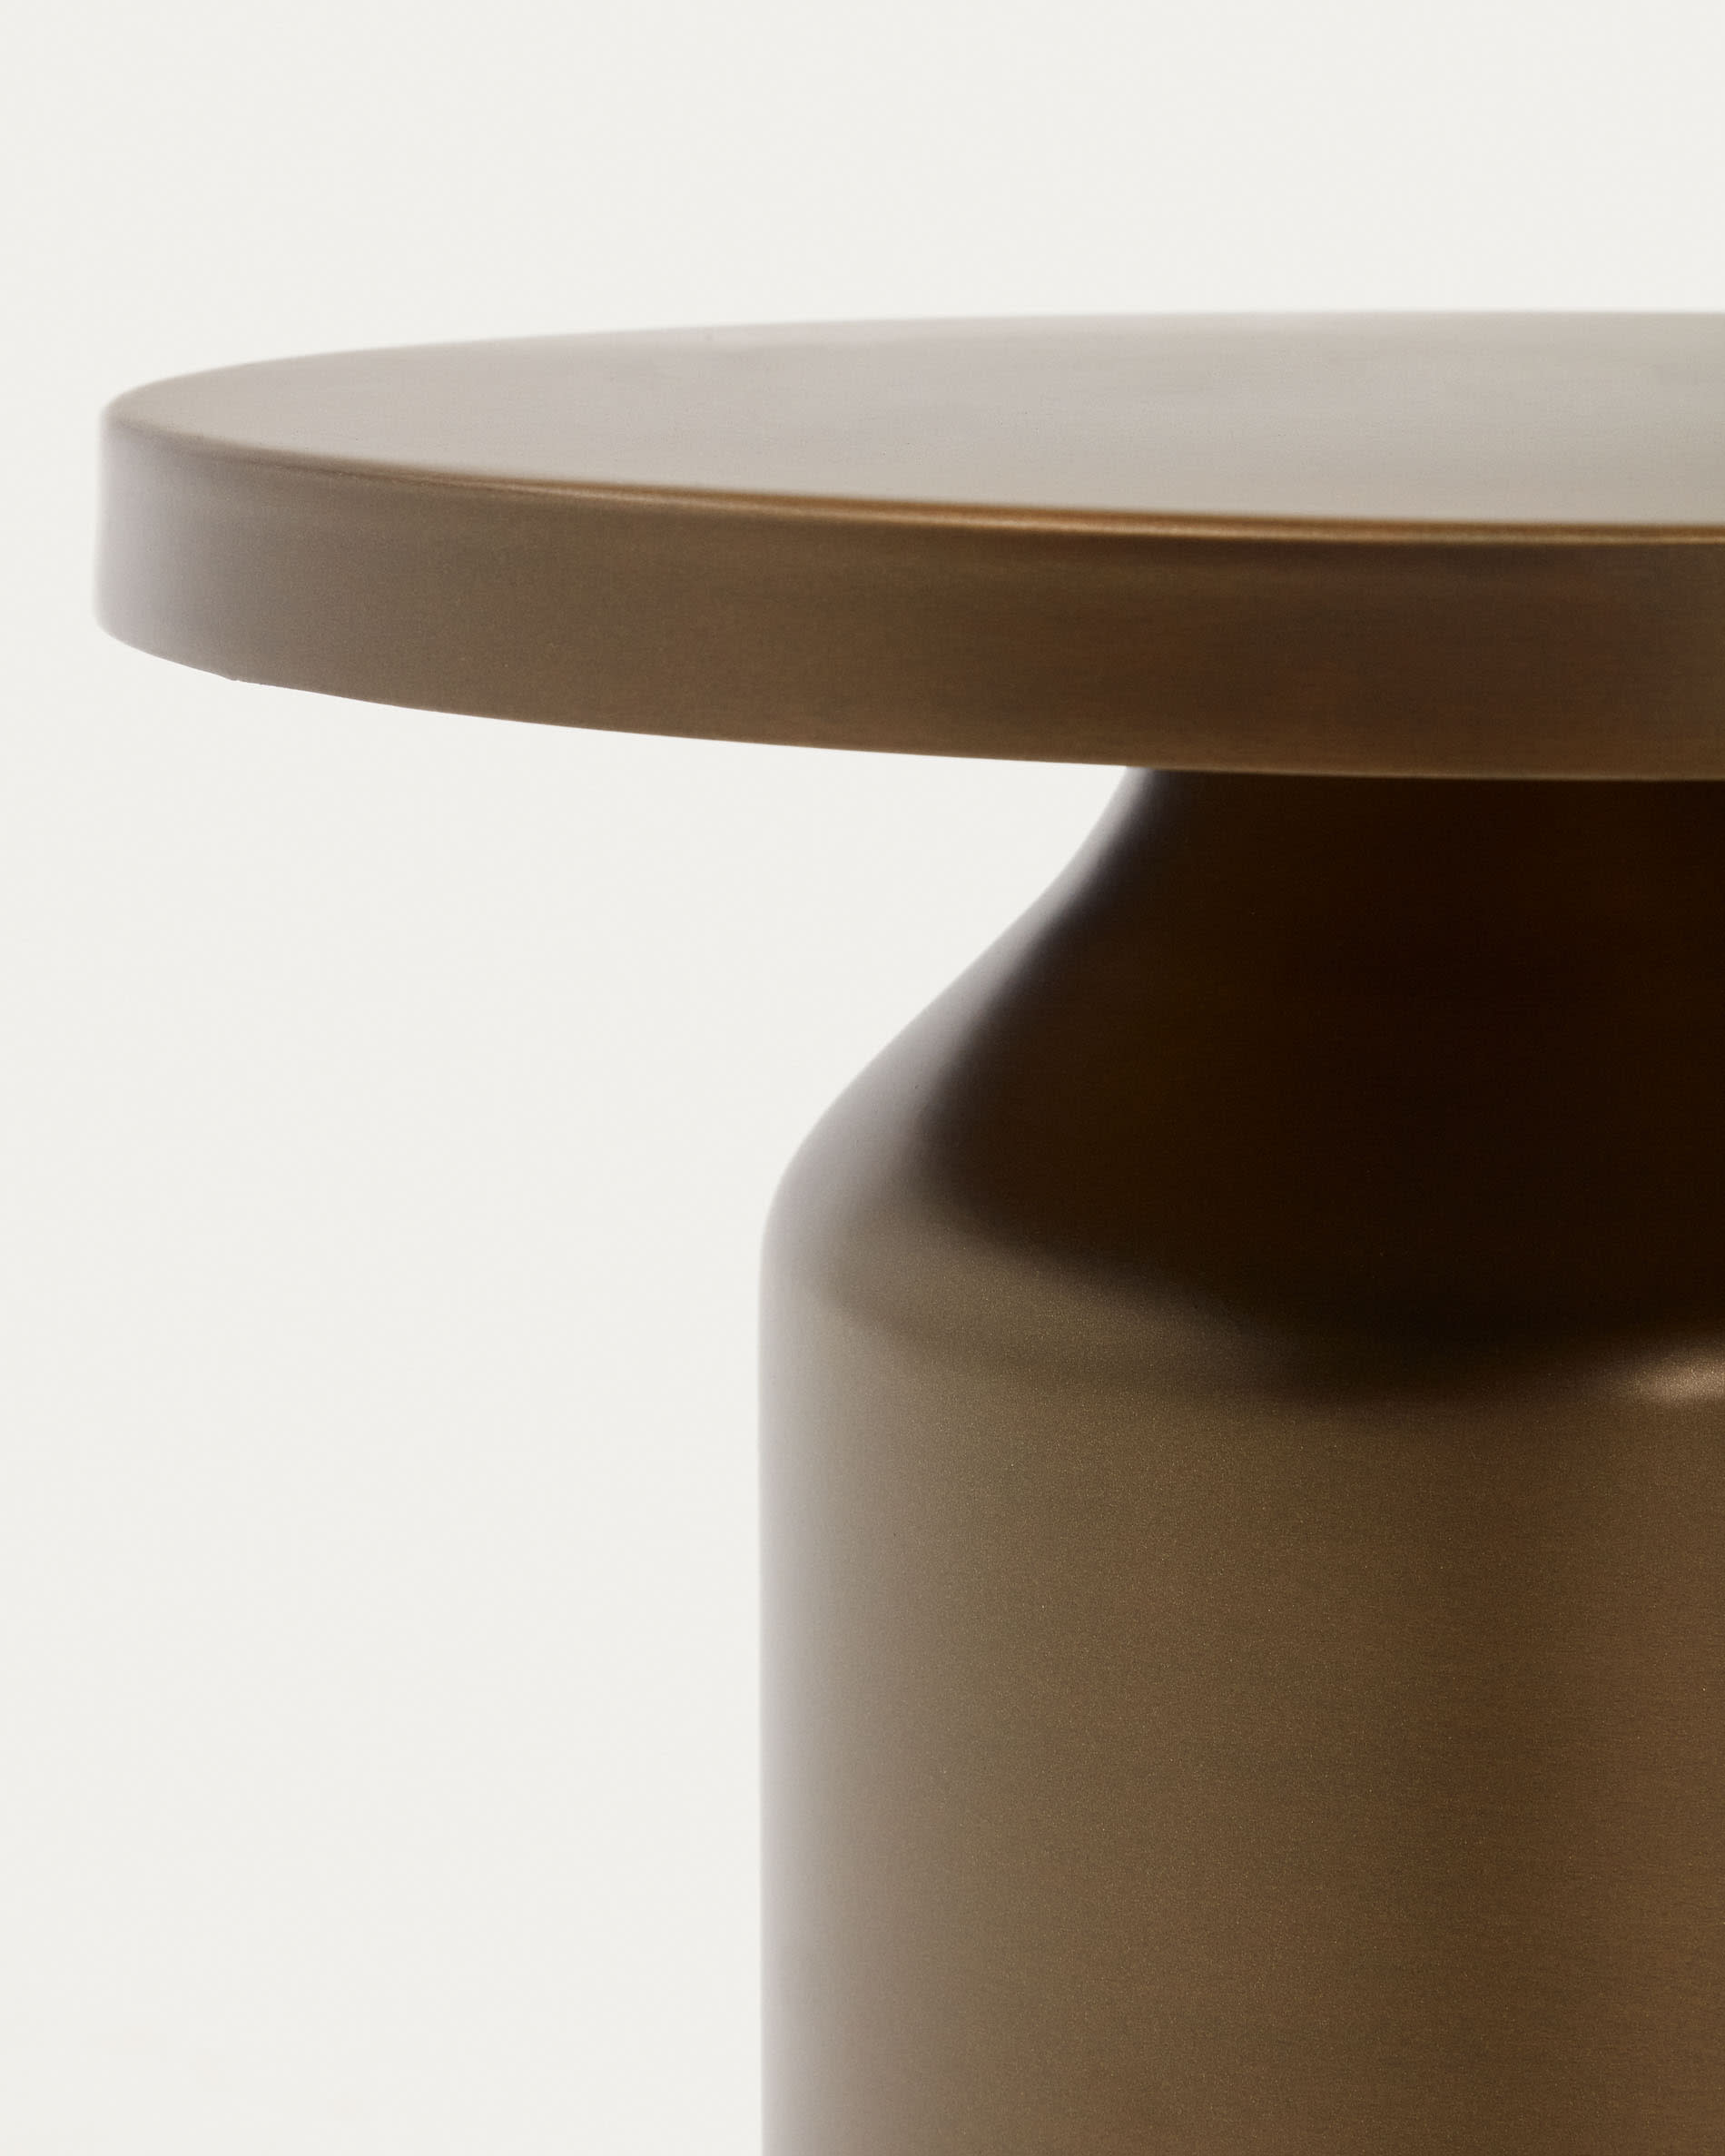 Malya metal round side table in brushed copper Ø 40.5 cm | Kave Home